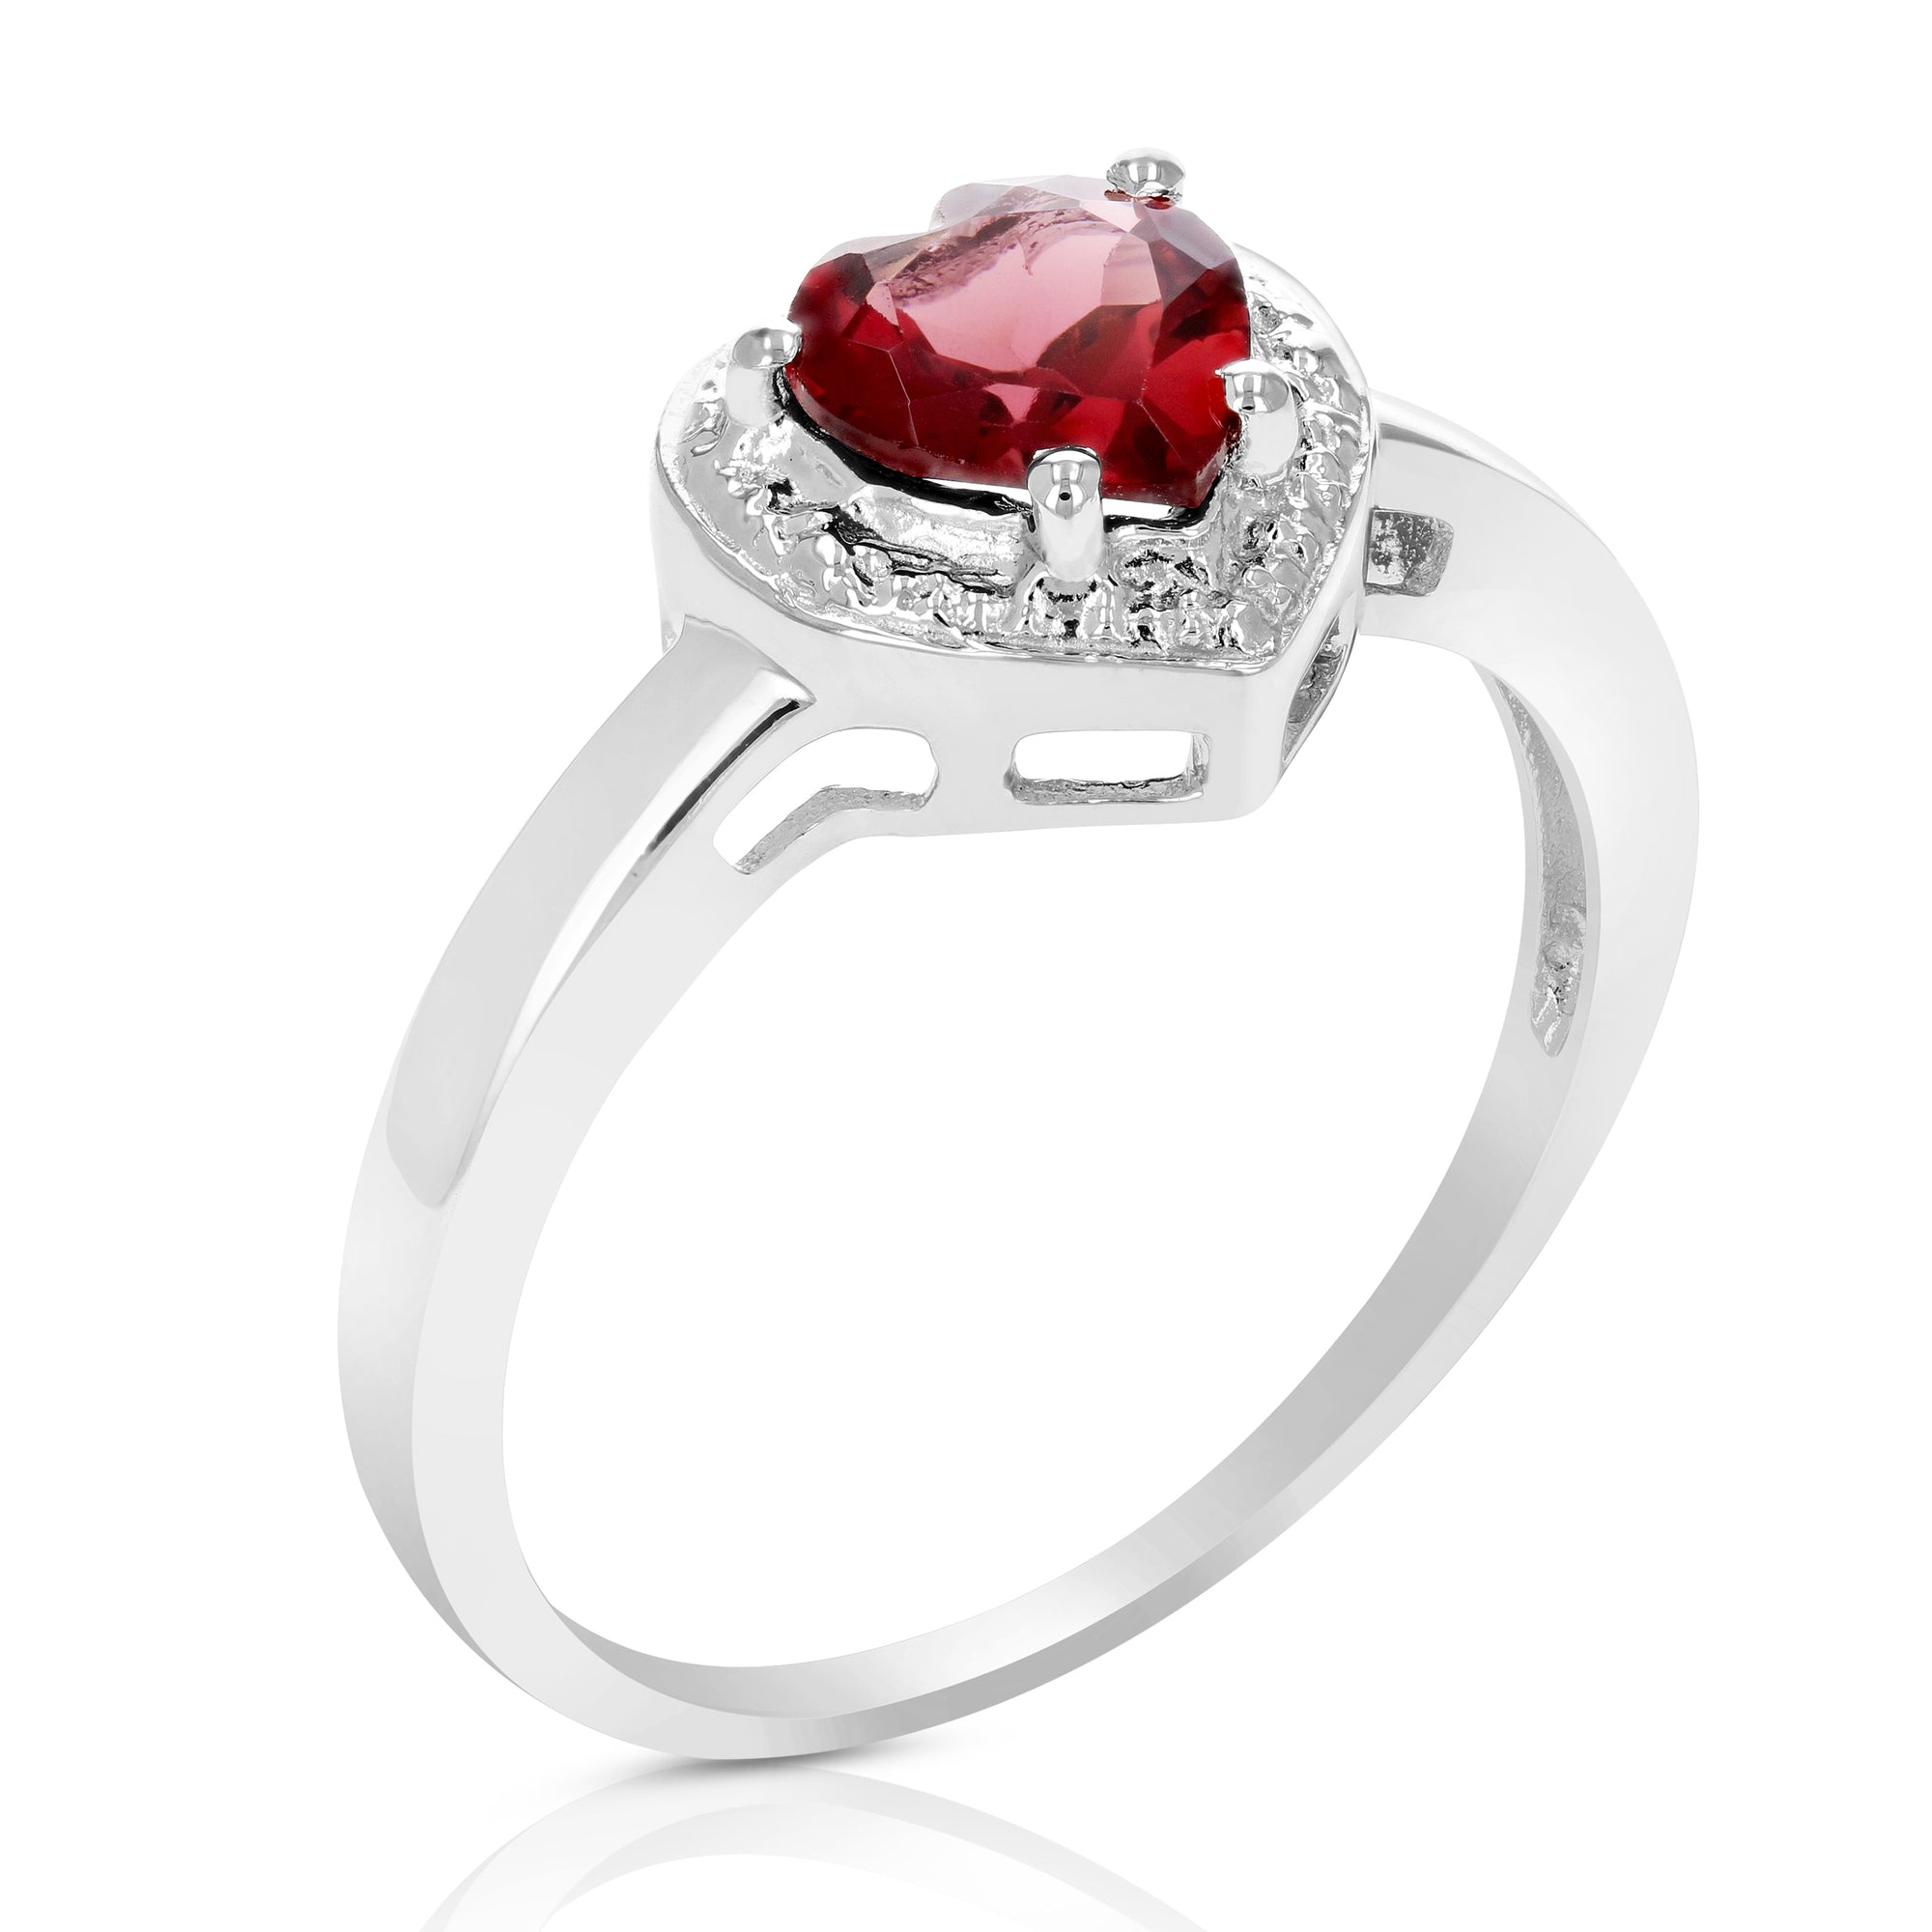 1 cttw Garnet Ring in .925 Sterling Silver with Rhodium Plating Heart Shape